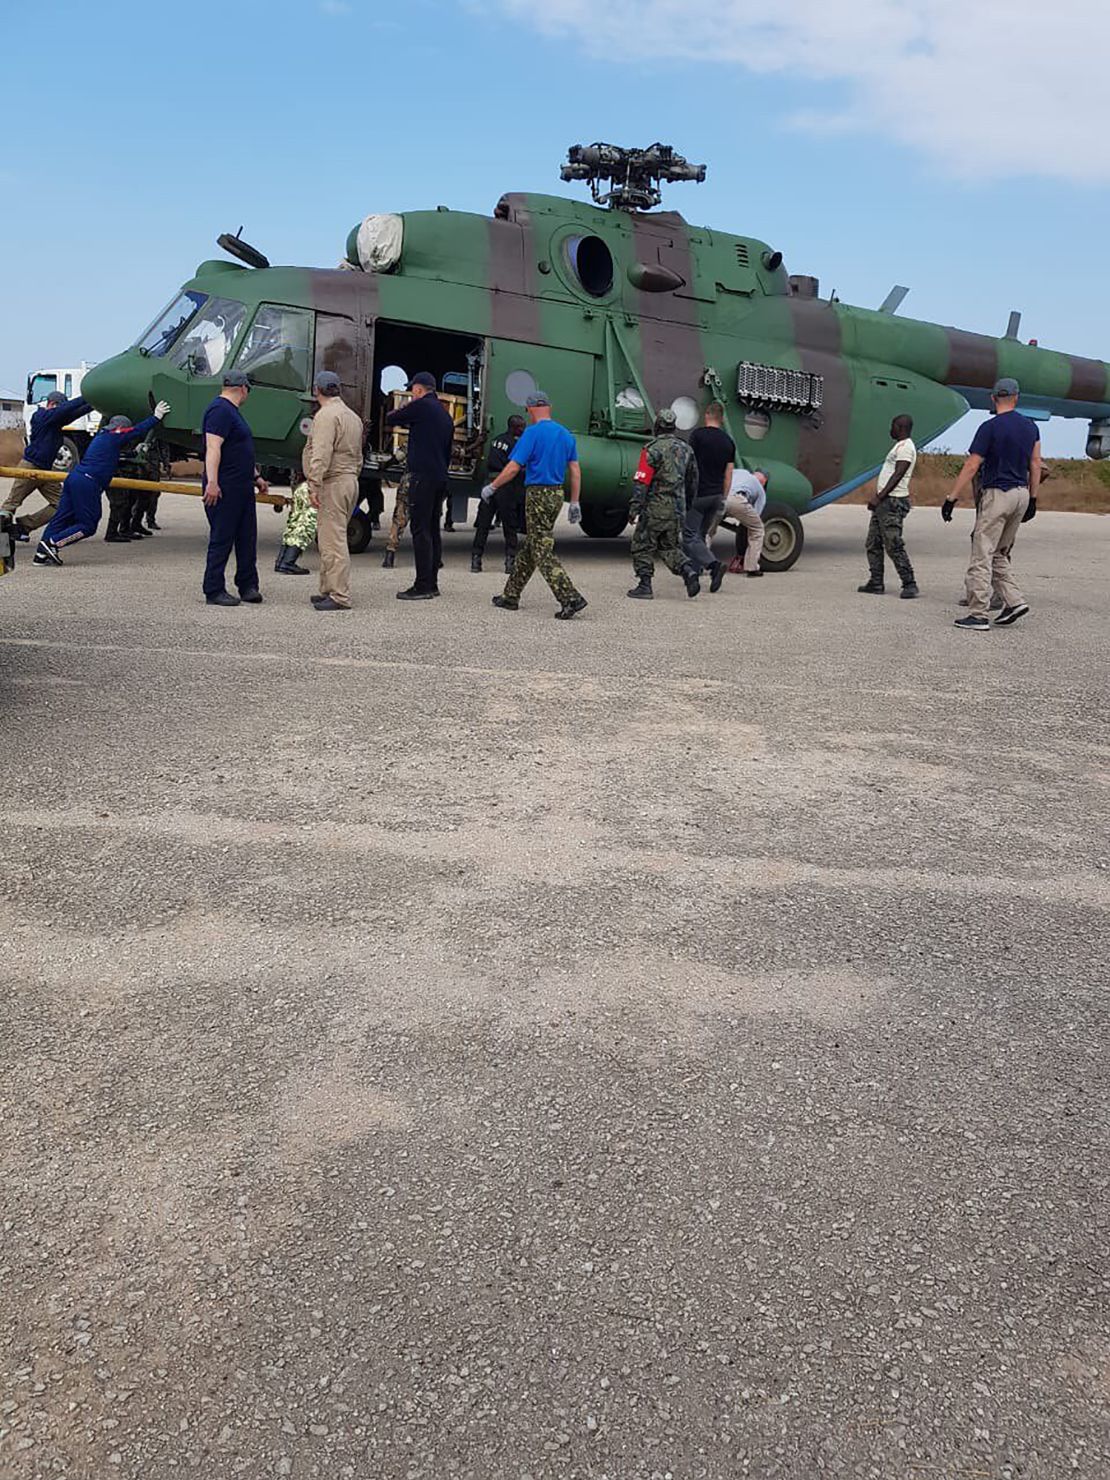 This image, shared widely on social media and verified by a CNN source, appears to show an Mi-17 transport helicopter, part of the military hardware delivery at Nacala in September.